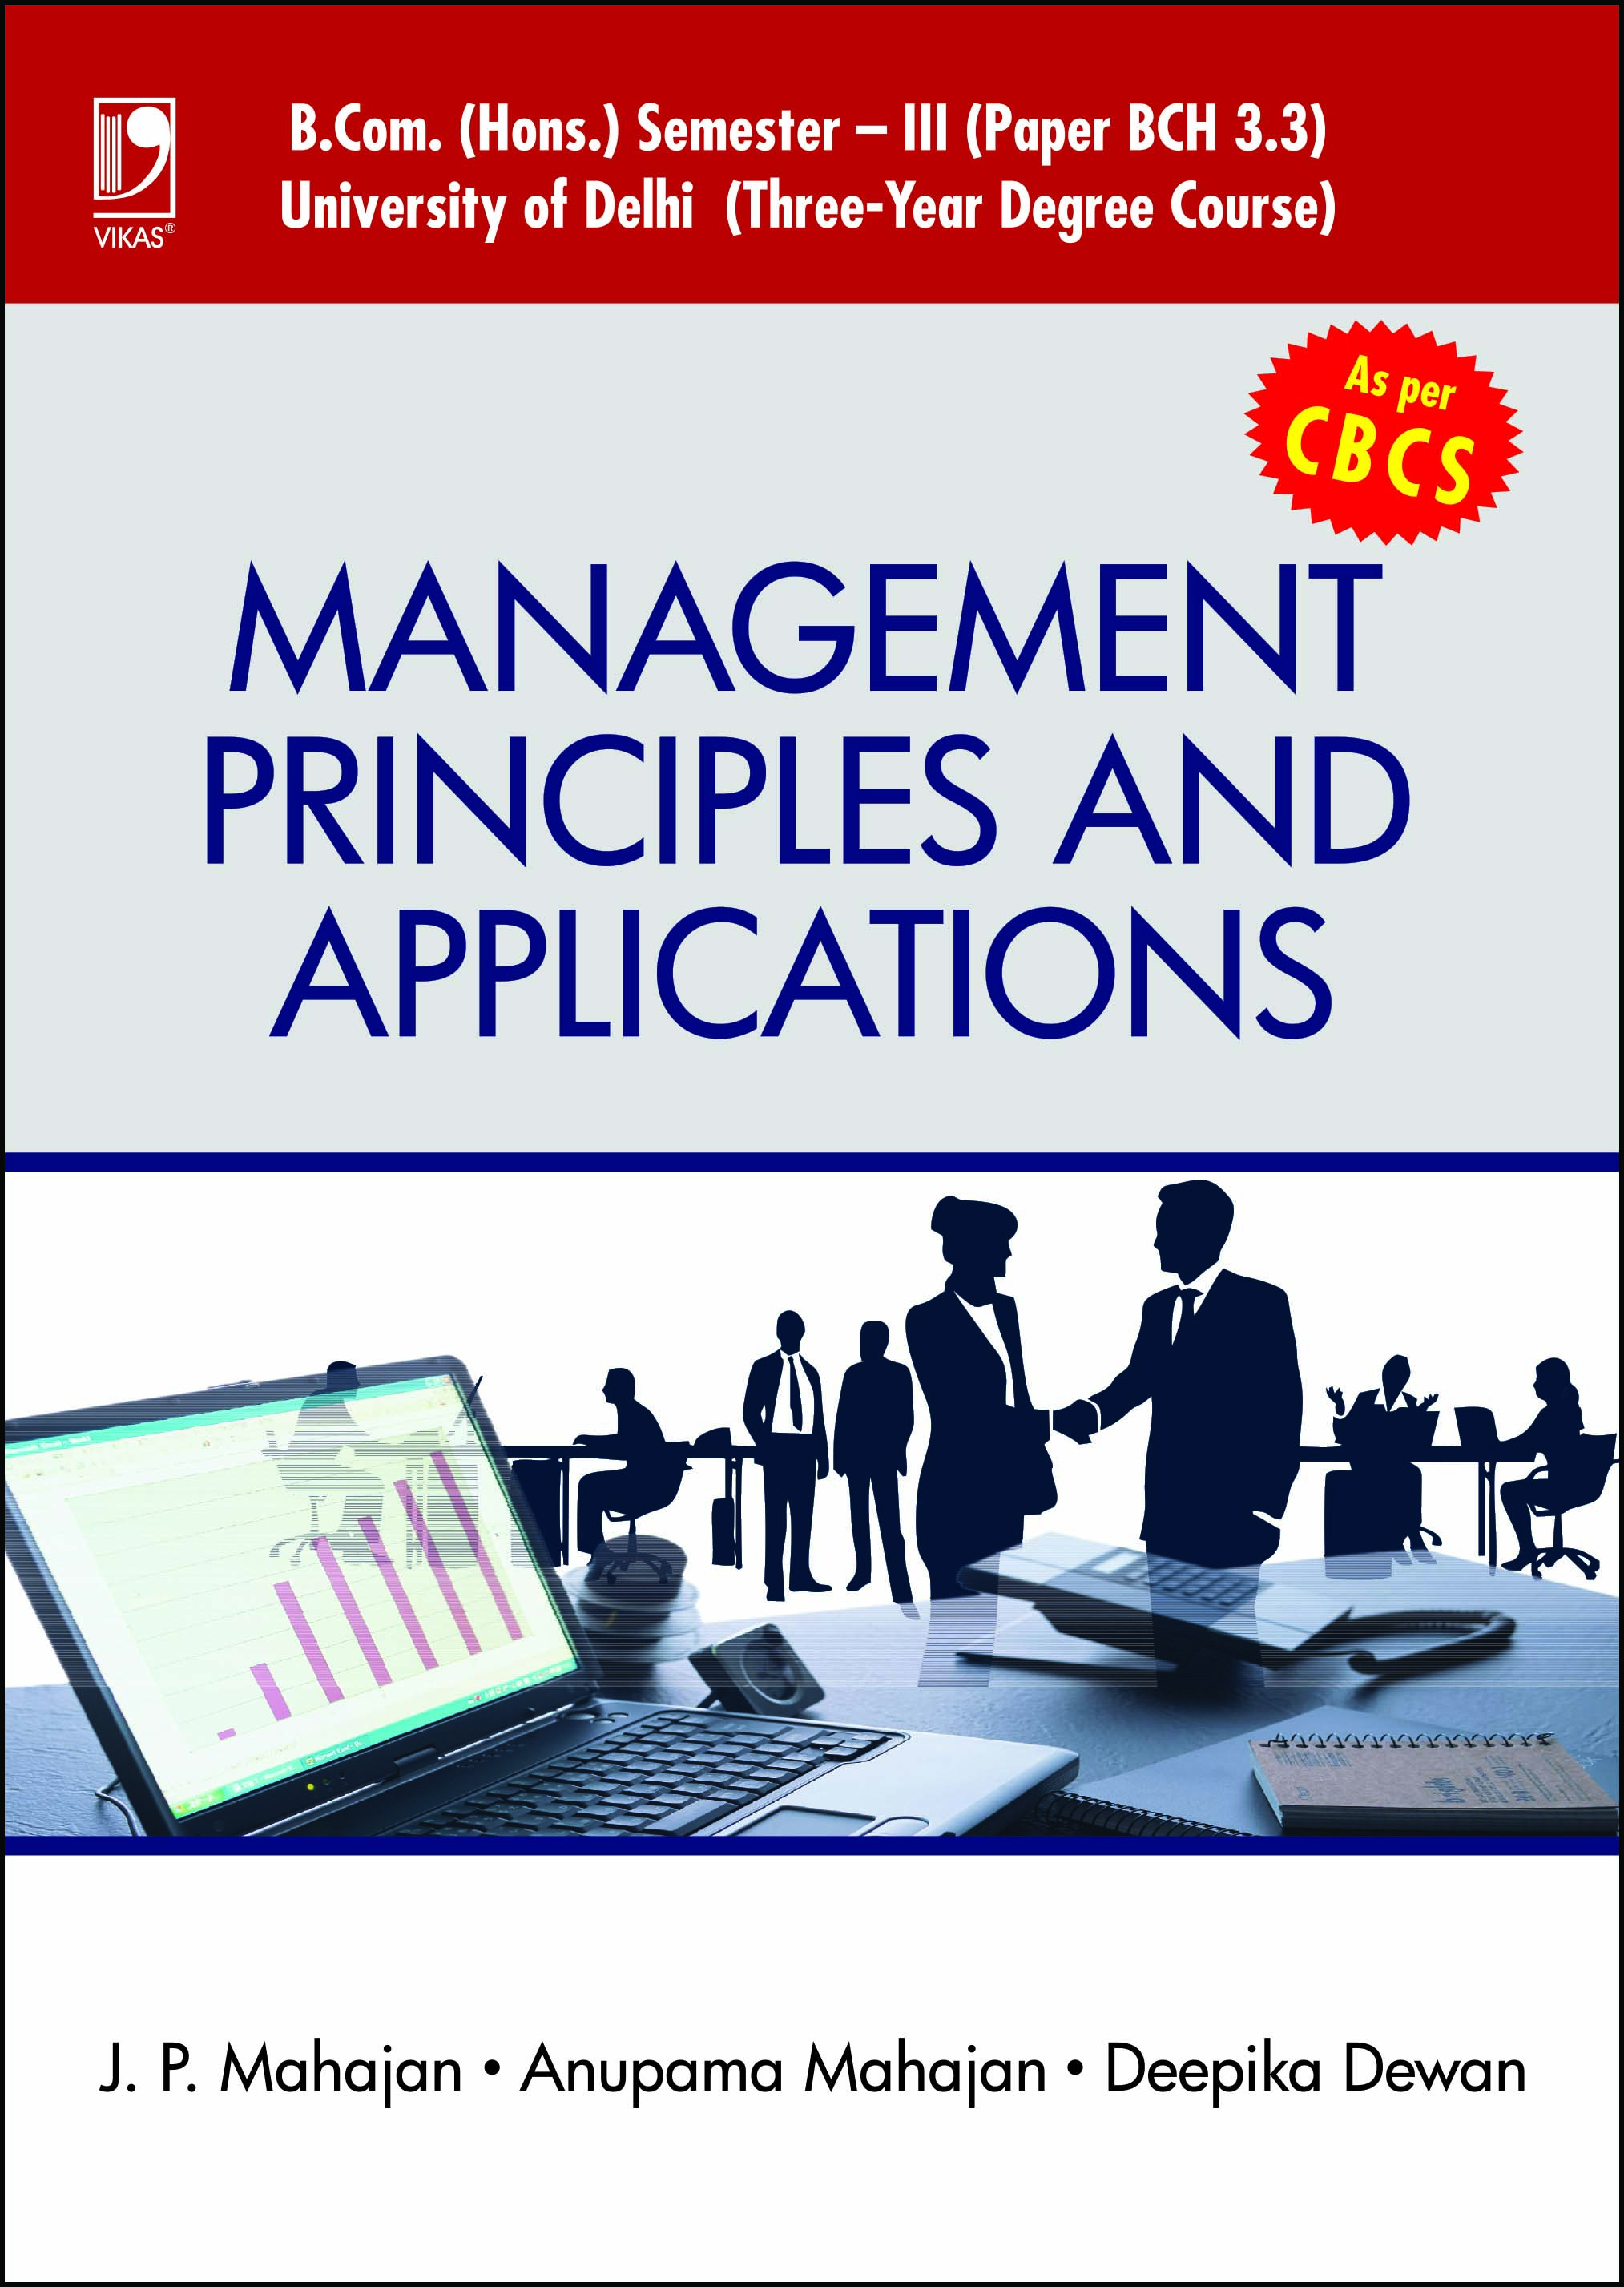 MANAGEMENT PRINCIPLES AND APPLICATIONS